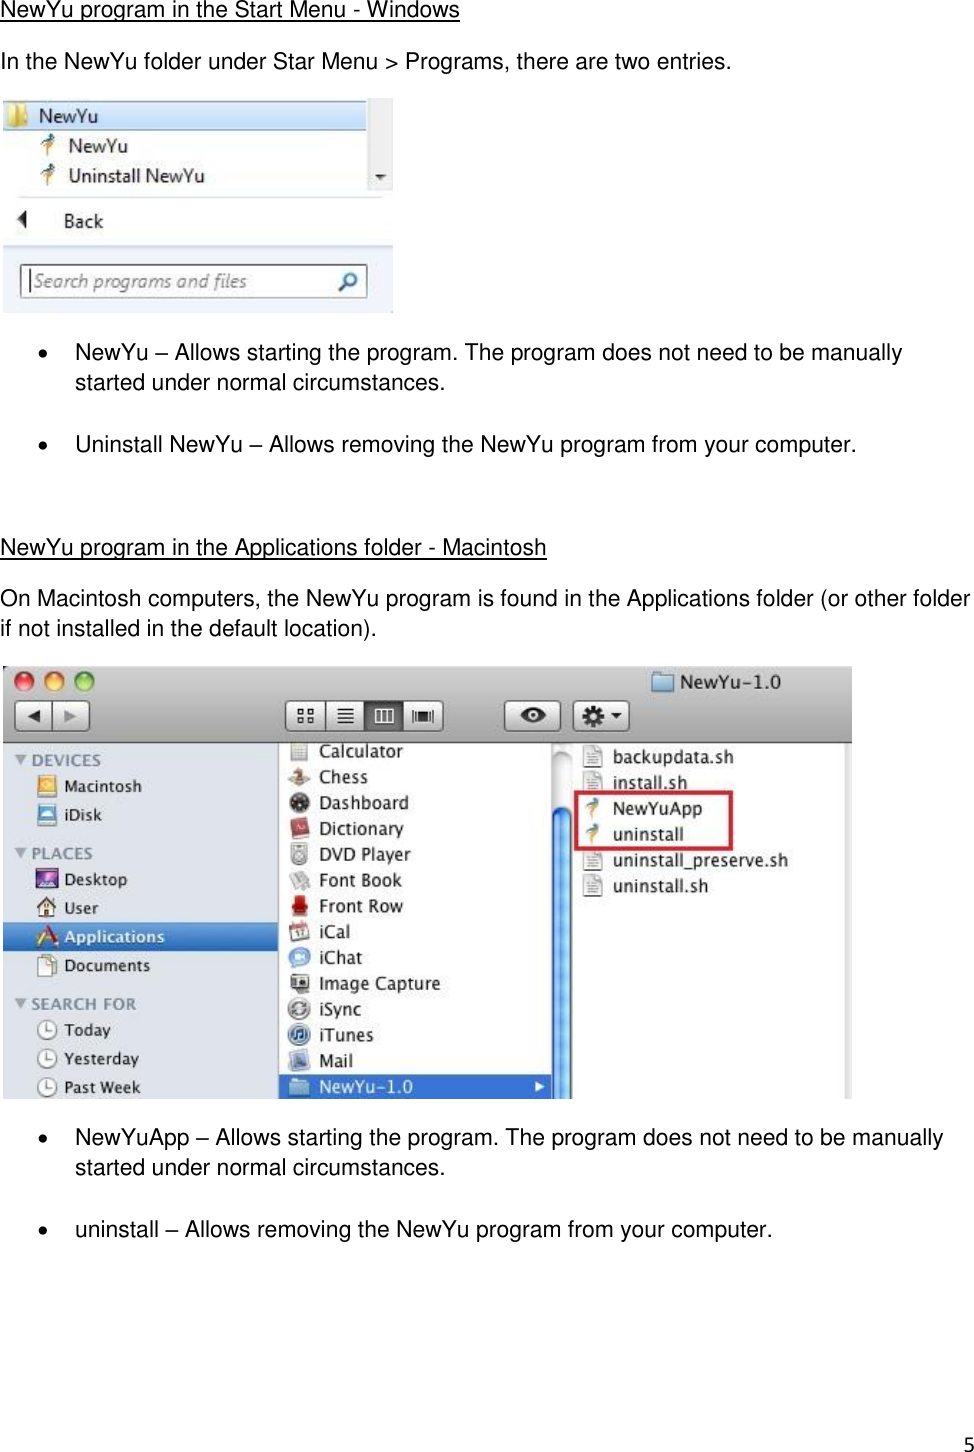 5 NewYu program in the Start Menu - Windows In the NewYu folder under Star Menu &gt; Programs, there are two entries.    NewYu – Allows starting the program. The program does not need to be manually started under normal circumstances.    Uninstall NewYu – Allows removing the NewYu program from your computer.  NewYu program in the Applications folder - Macintosh On Macintosh computers, the NewYu program is found in the Applications folder (or other folder if not installed in the default location).    NewYuApp – Allows starting the program. The program does not need to be manually started under normal circumstances.    uninstall – Allows removing the NewYu program from your computer.    